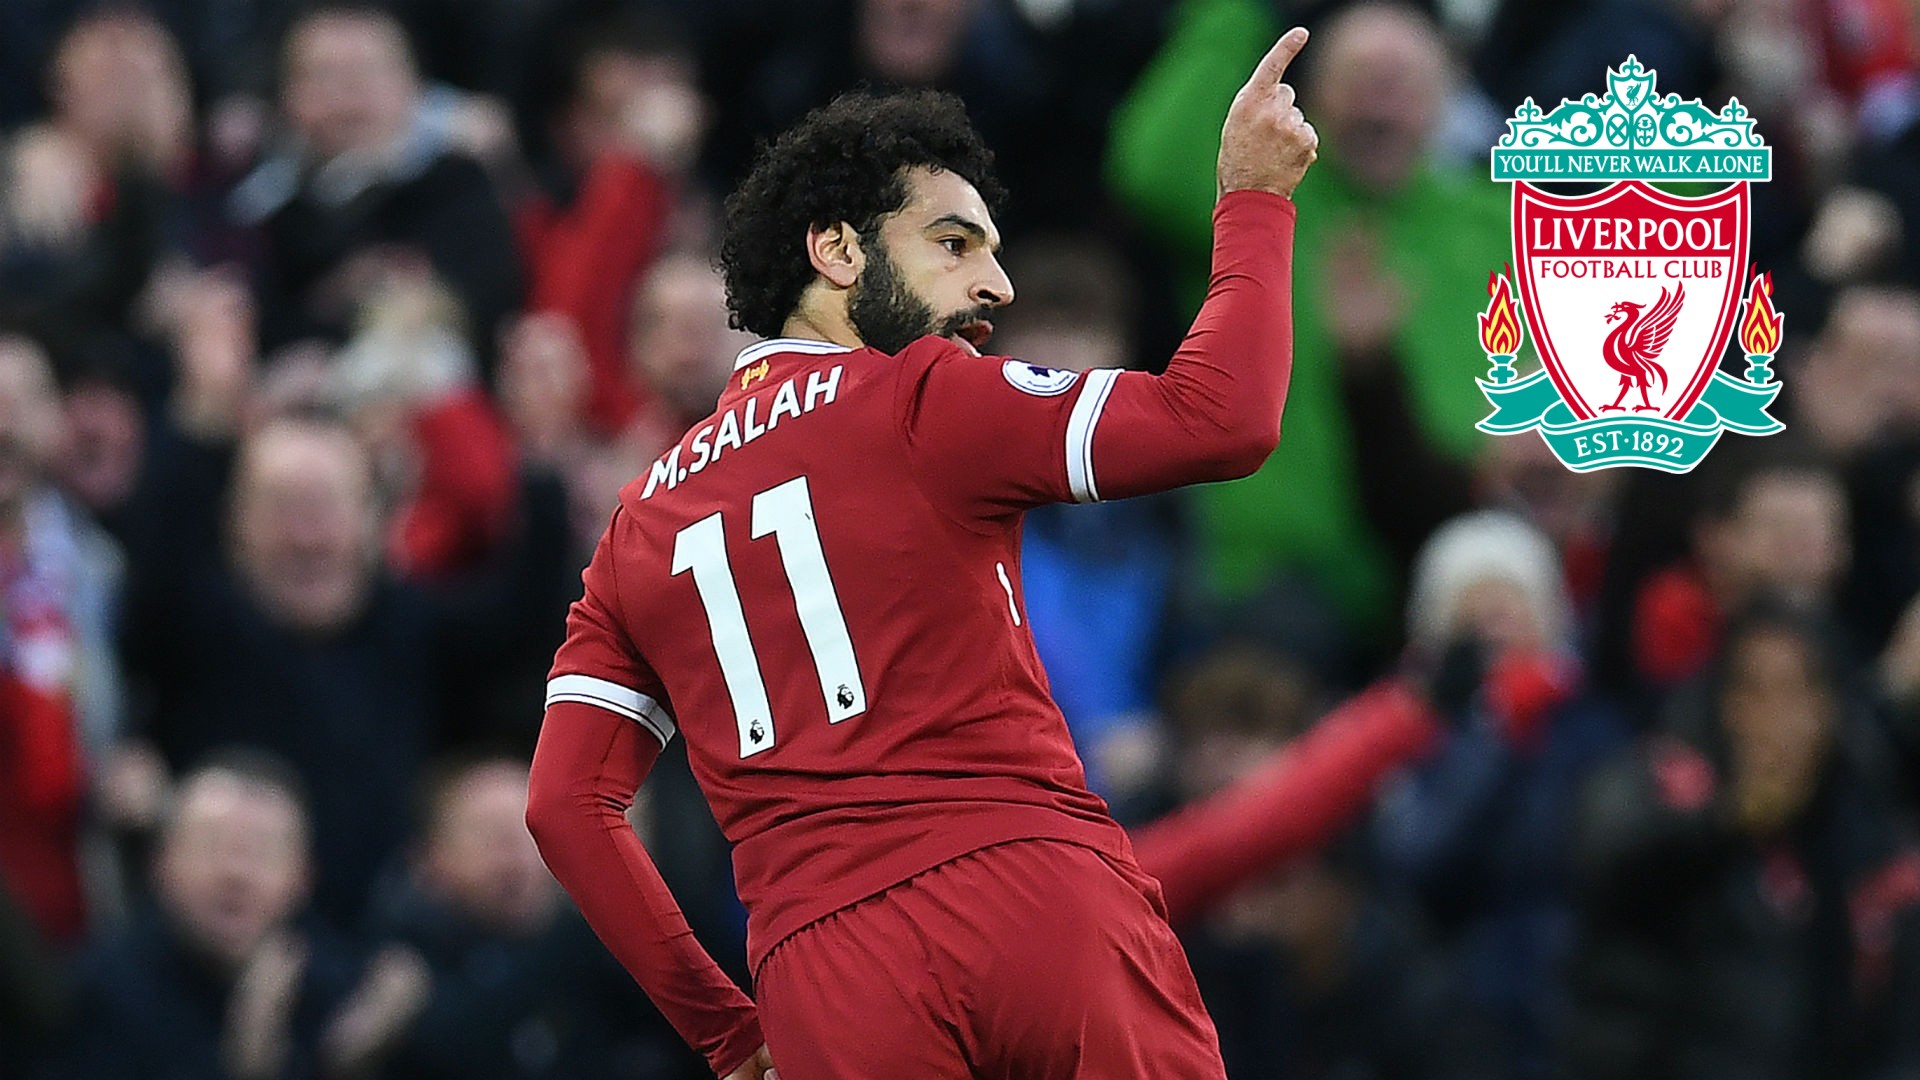 Best Mohamed Salah Liverpool Wallpaper HD with image resolution 1920x1080 pixel. You can make this wallpaper for your Desktop Computer Backgrounds, Mac Wallpapers, Android Lock screen or iPhone Screensavers